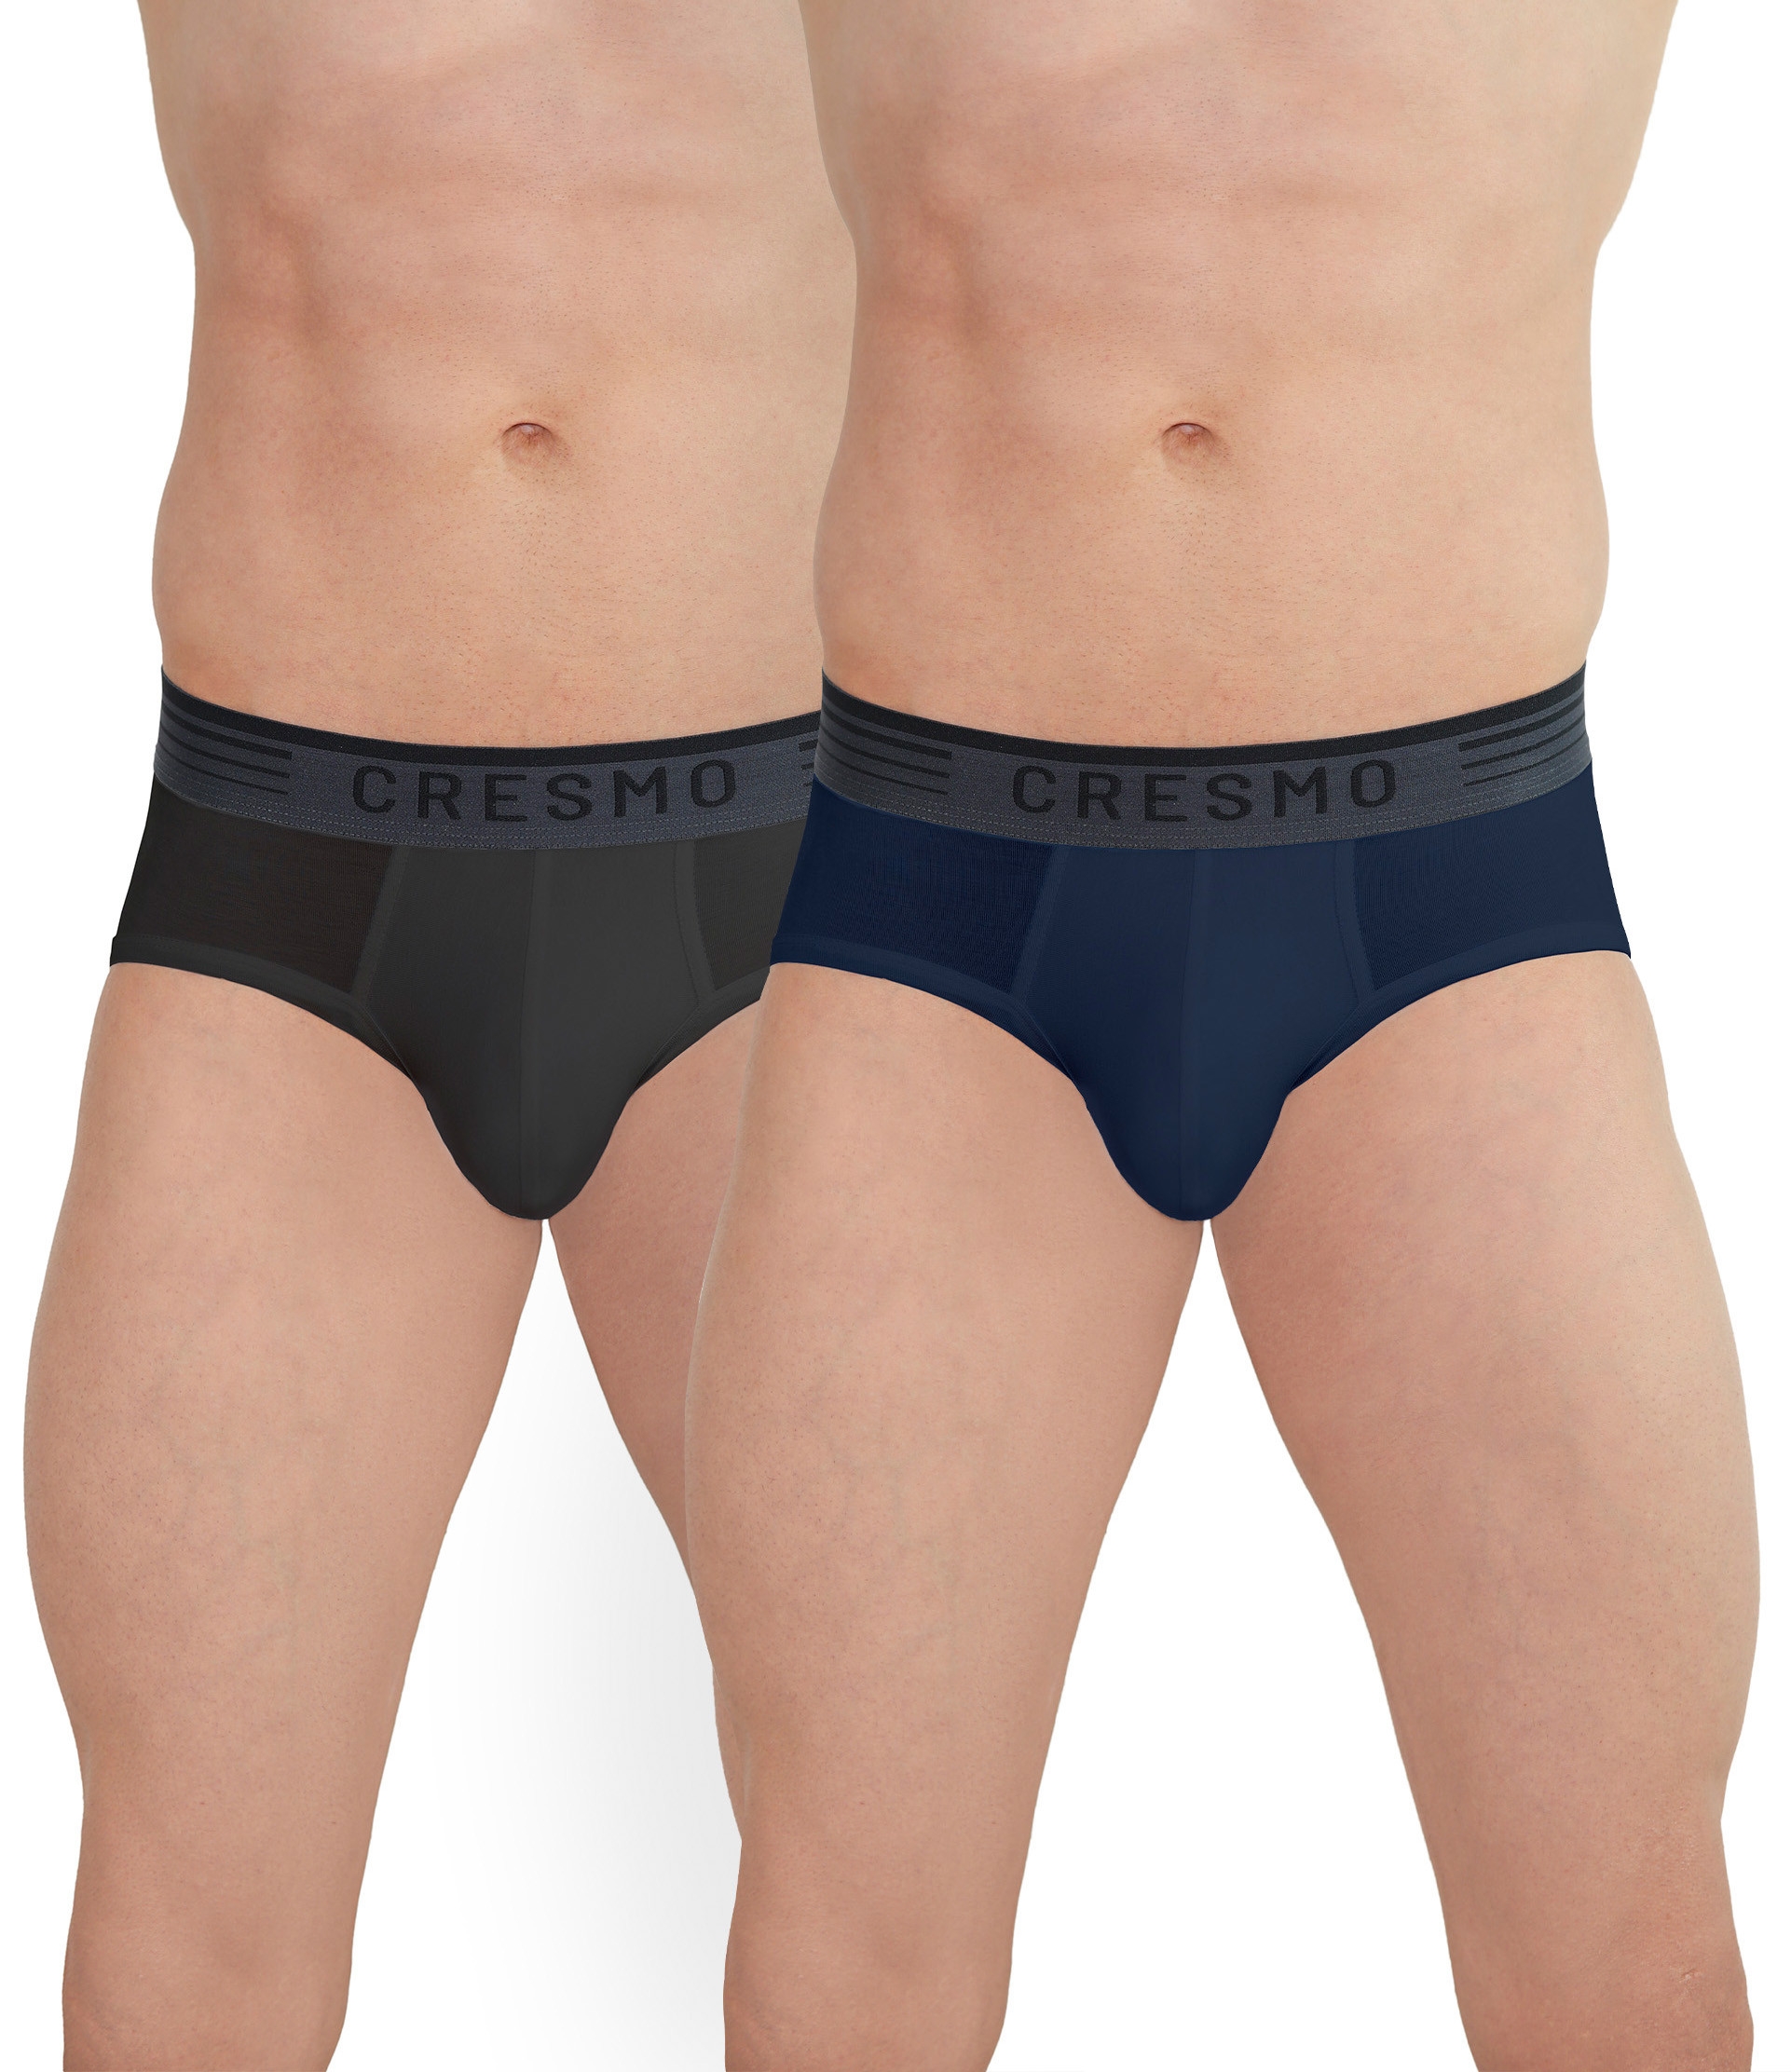 CRESMO | CRESMO Men's Microbial Micro Modal Underwear Breathable Ultra Soft Comfort Lightweight Brief (Pack of 2)